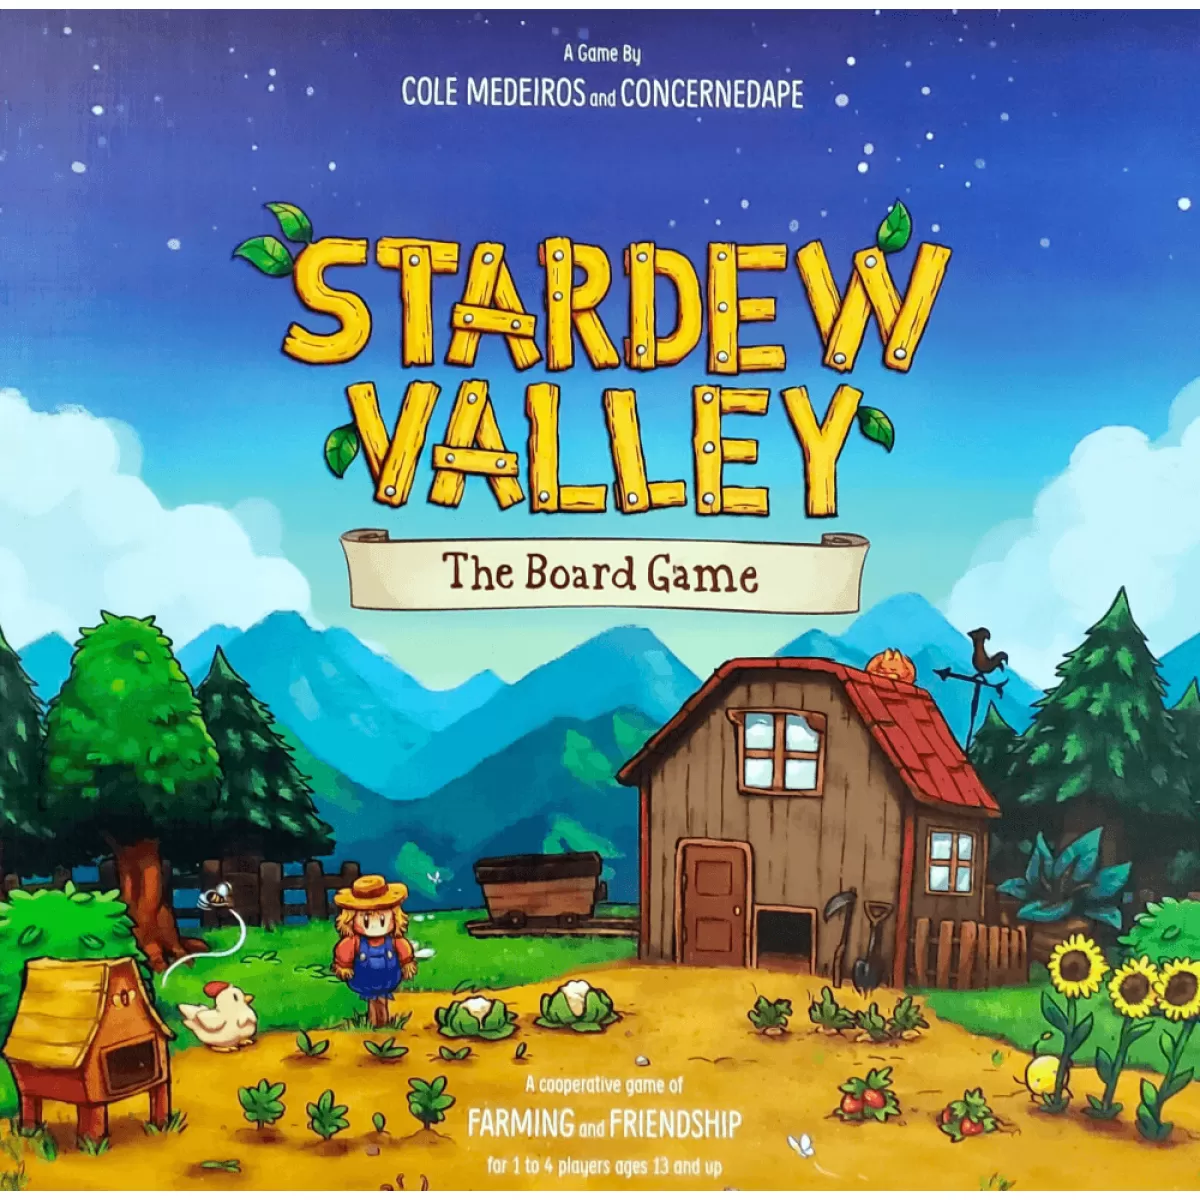 Stardew Valley The Board Game [::] Let's Play Games